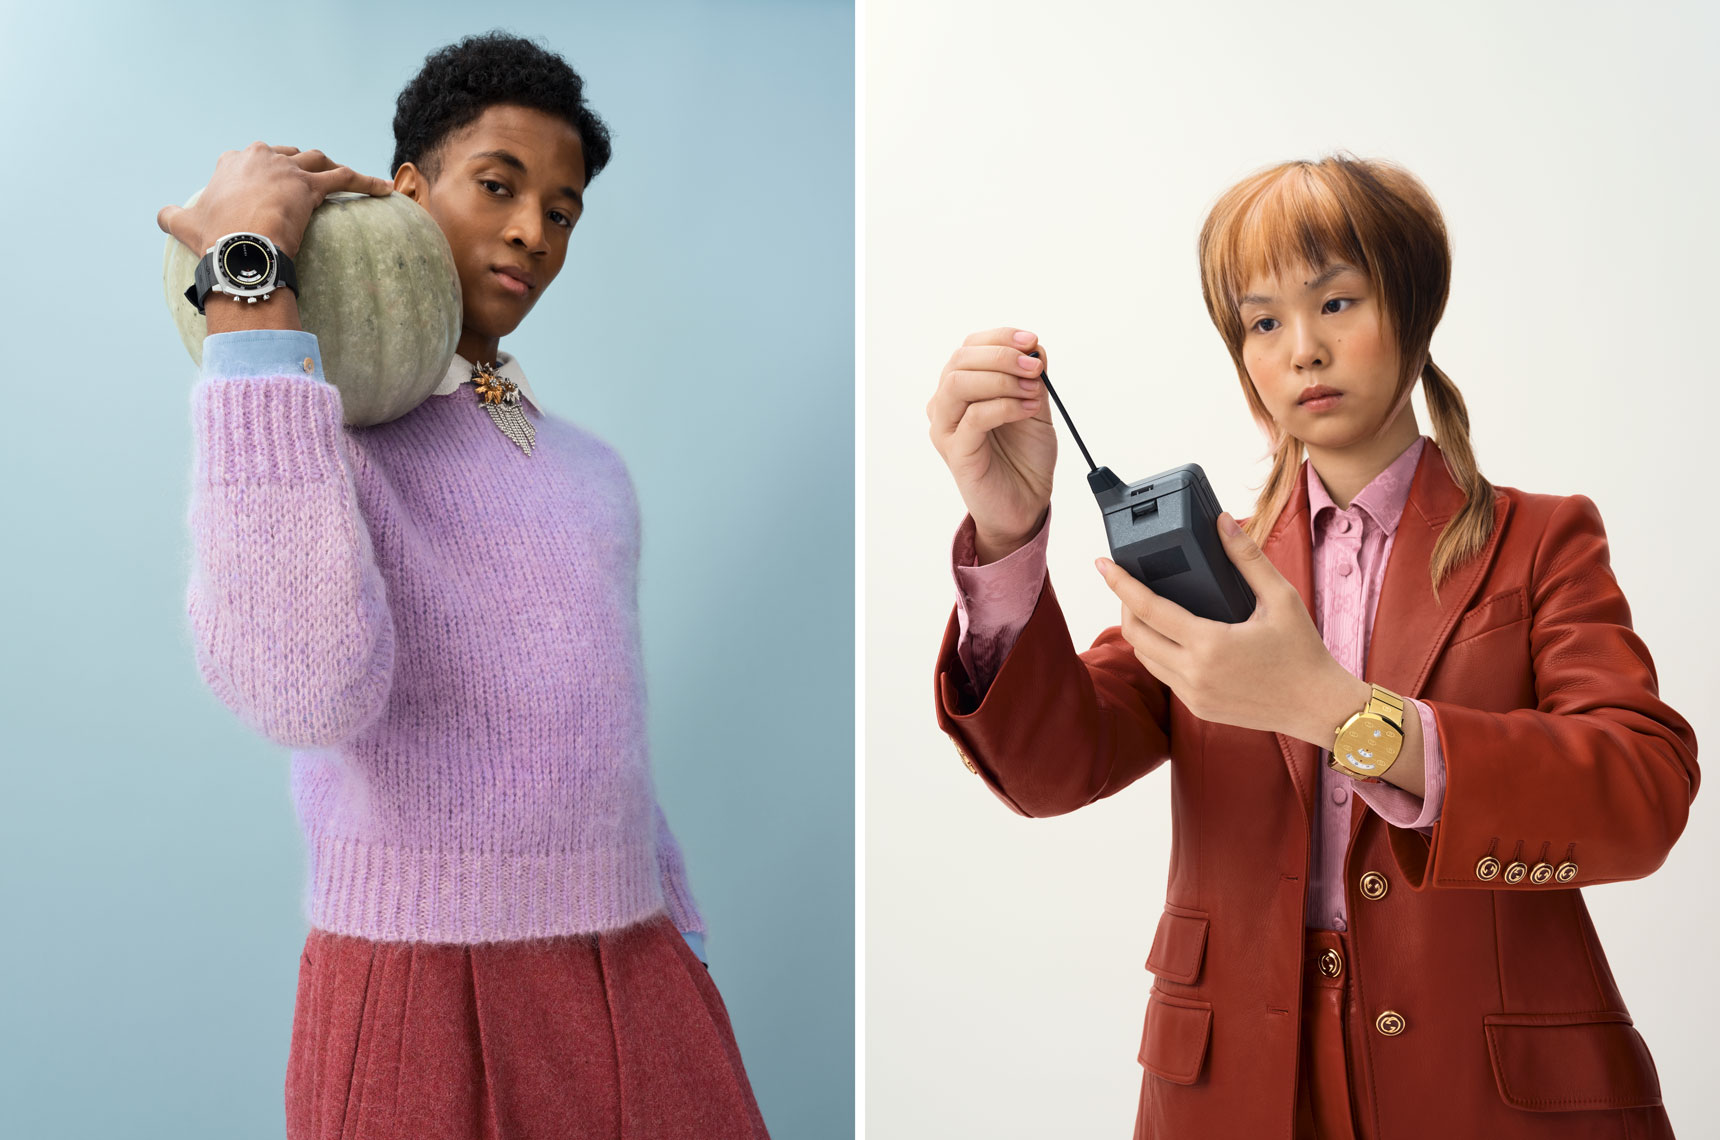 issie-gibbons-fashion-stylist-hypebeast-gucci-grip-campaign-editorial-advertorial-90s-phone